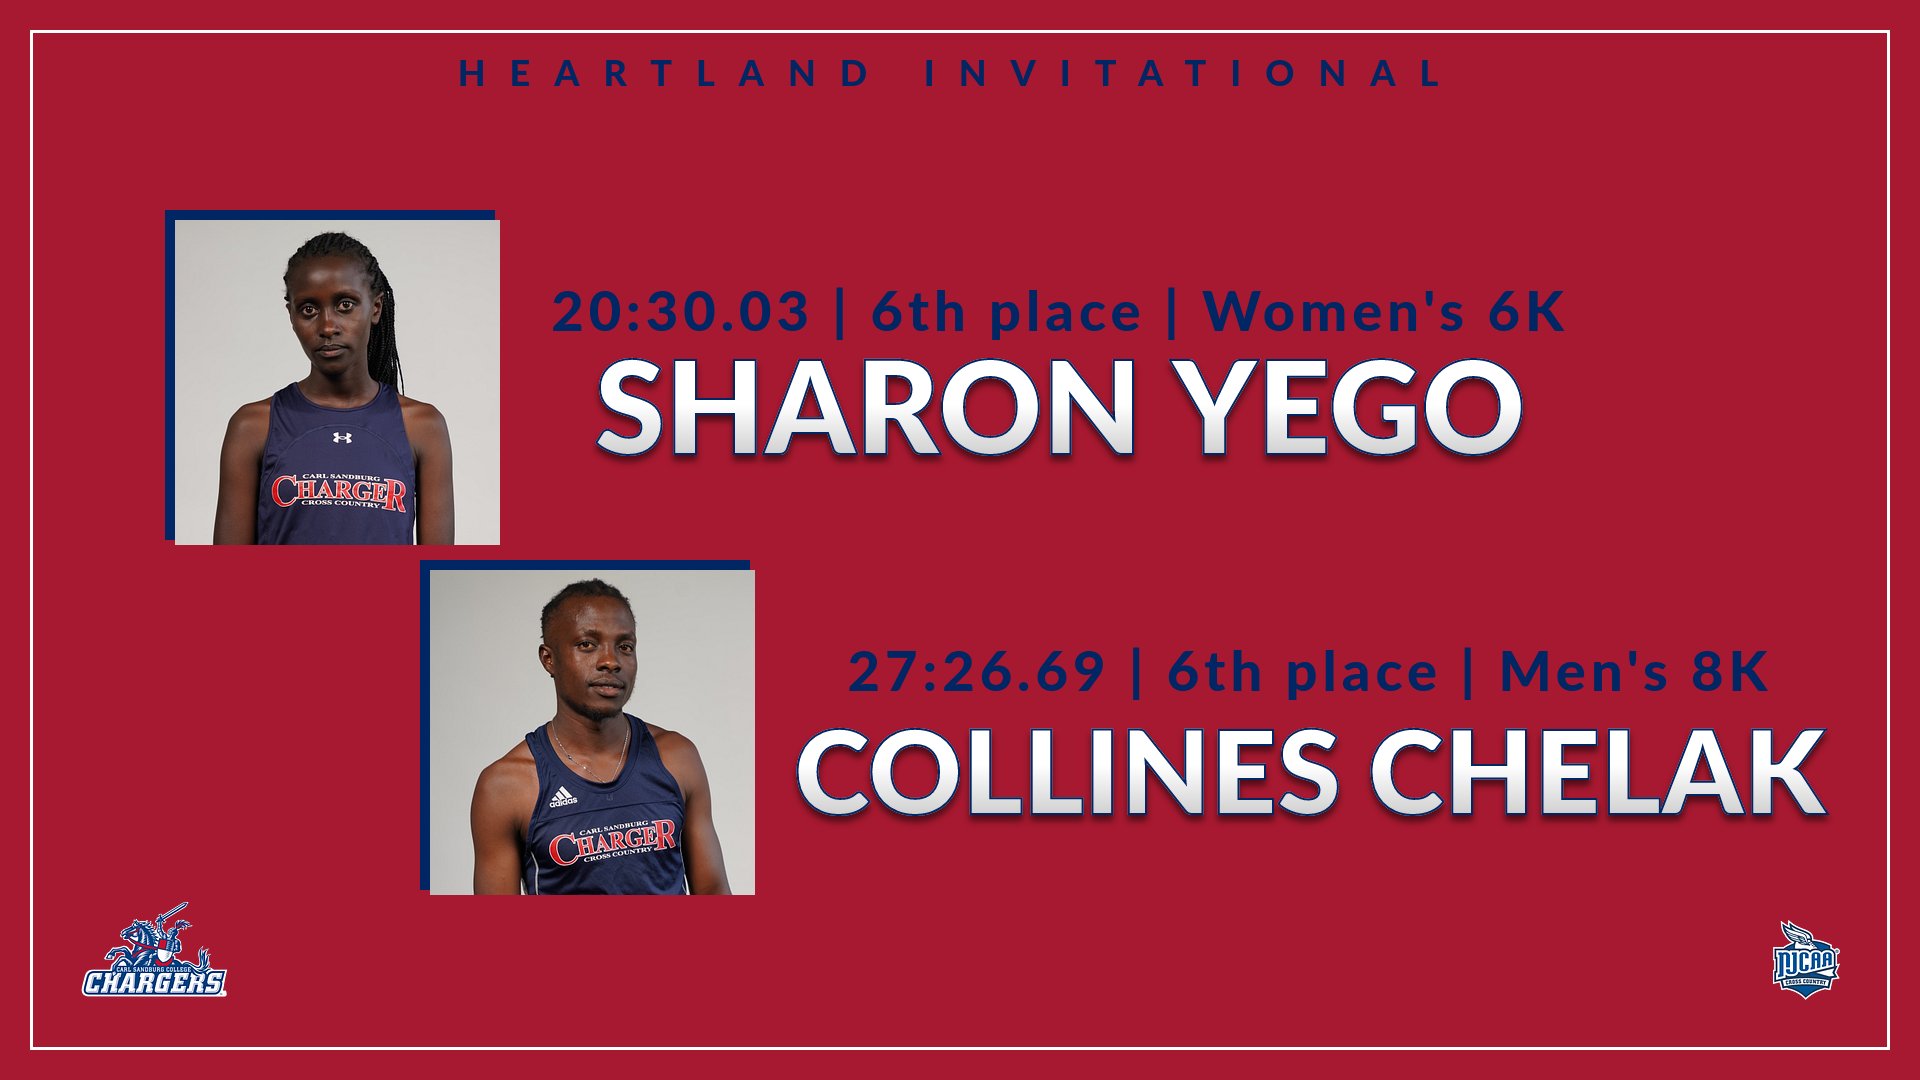 Yego, Chelak Each Place 6th for Chargers at Heartland Invite